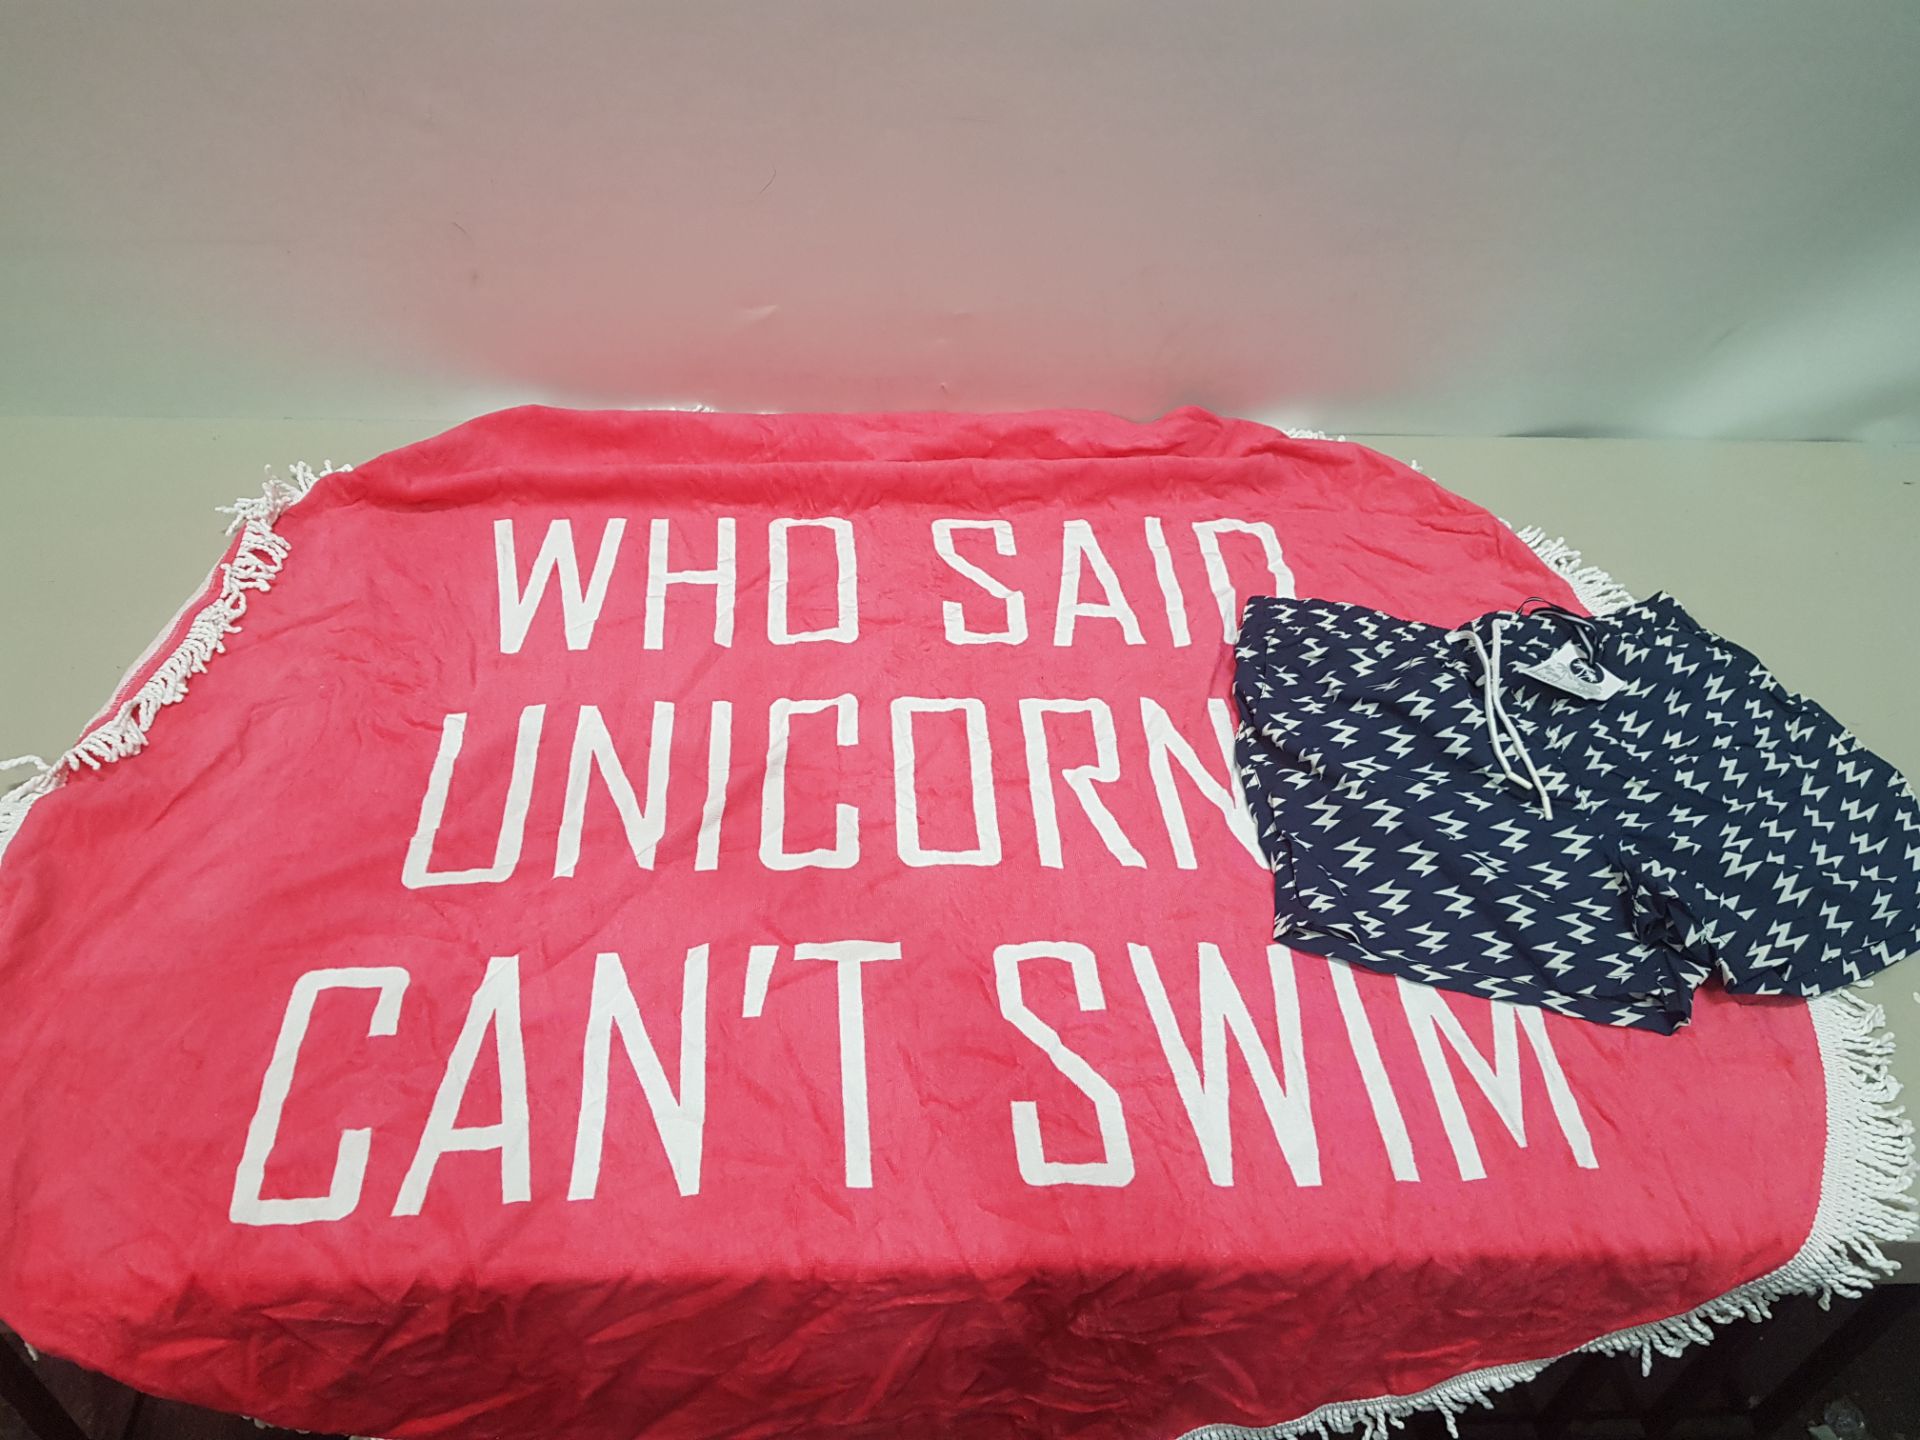 16 X PIECE BRAND NEW MIXED LOT CONTAINING 5 WHO SAID UNICORNS CANT SWIM BEACH TOWELS , 11 NAVY BRAVE